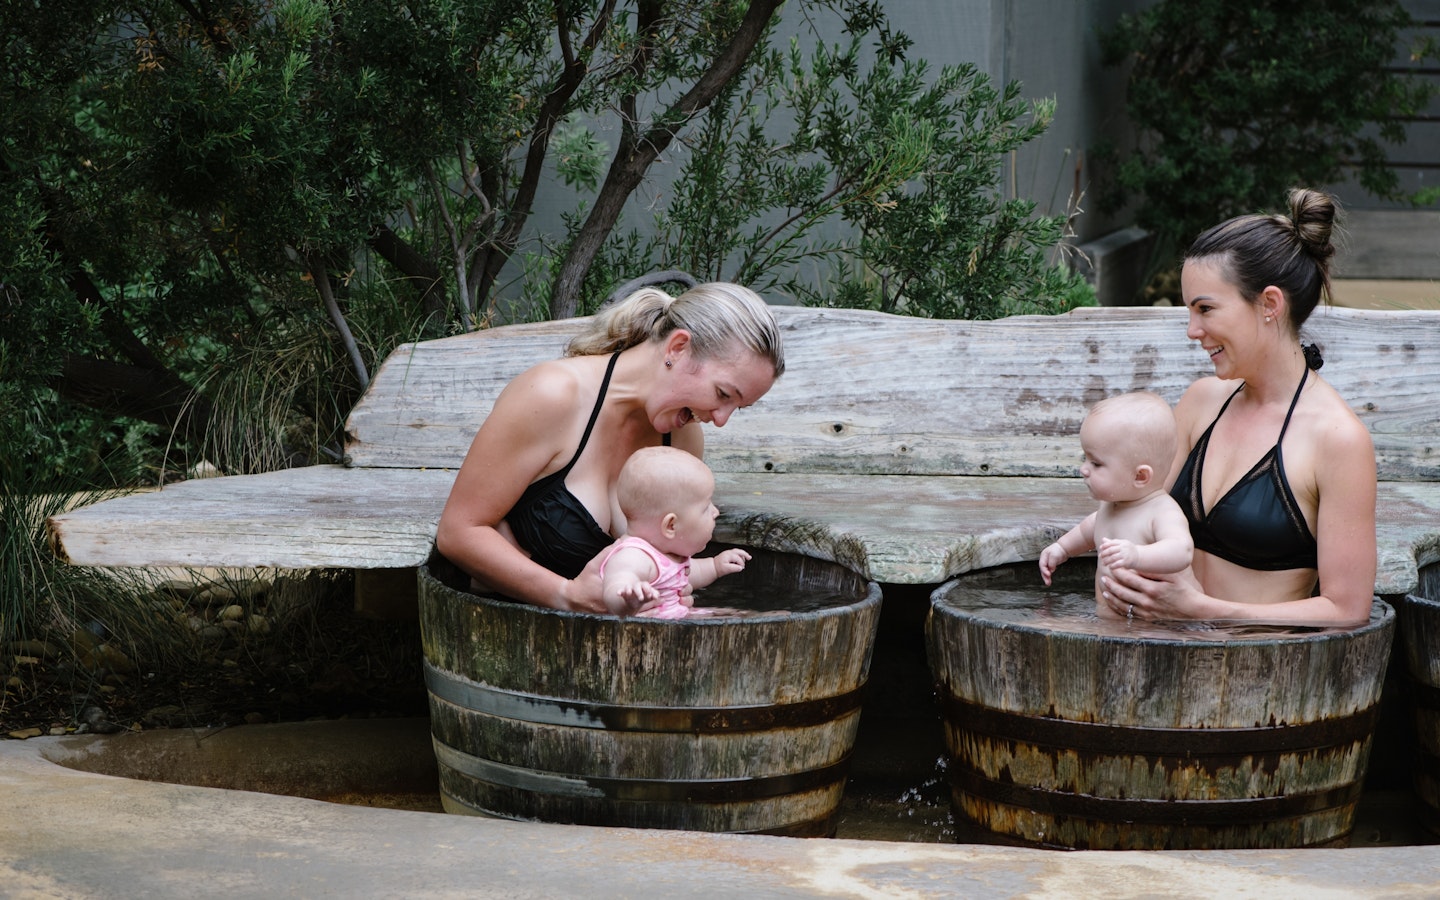 two women bathing in barrels with their babies